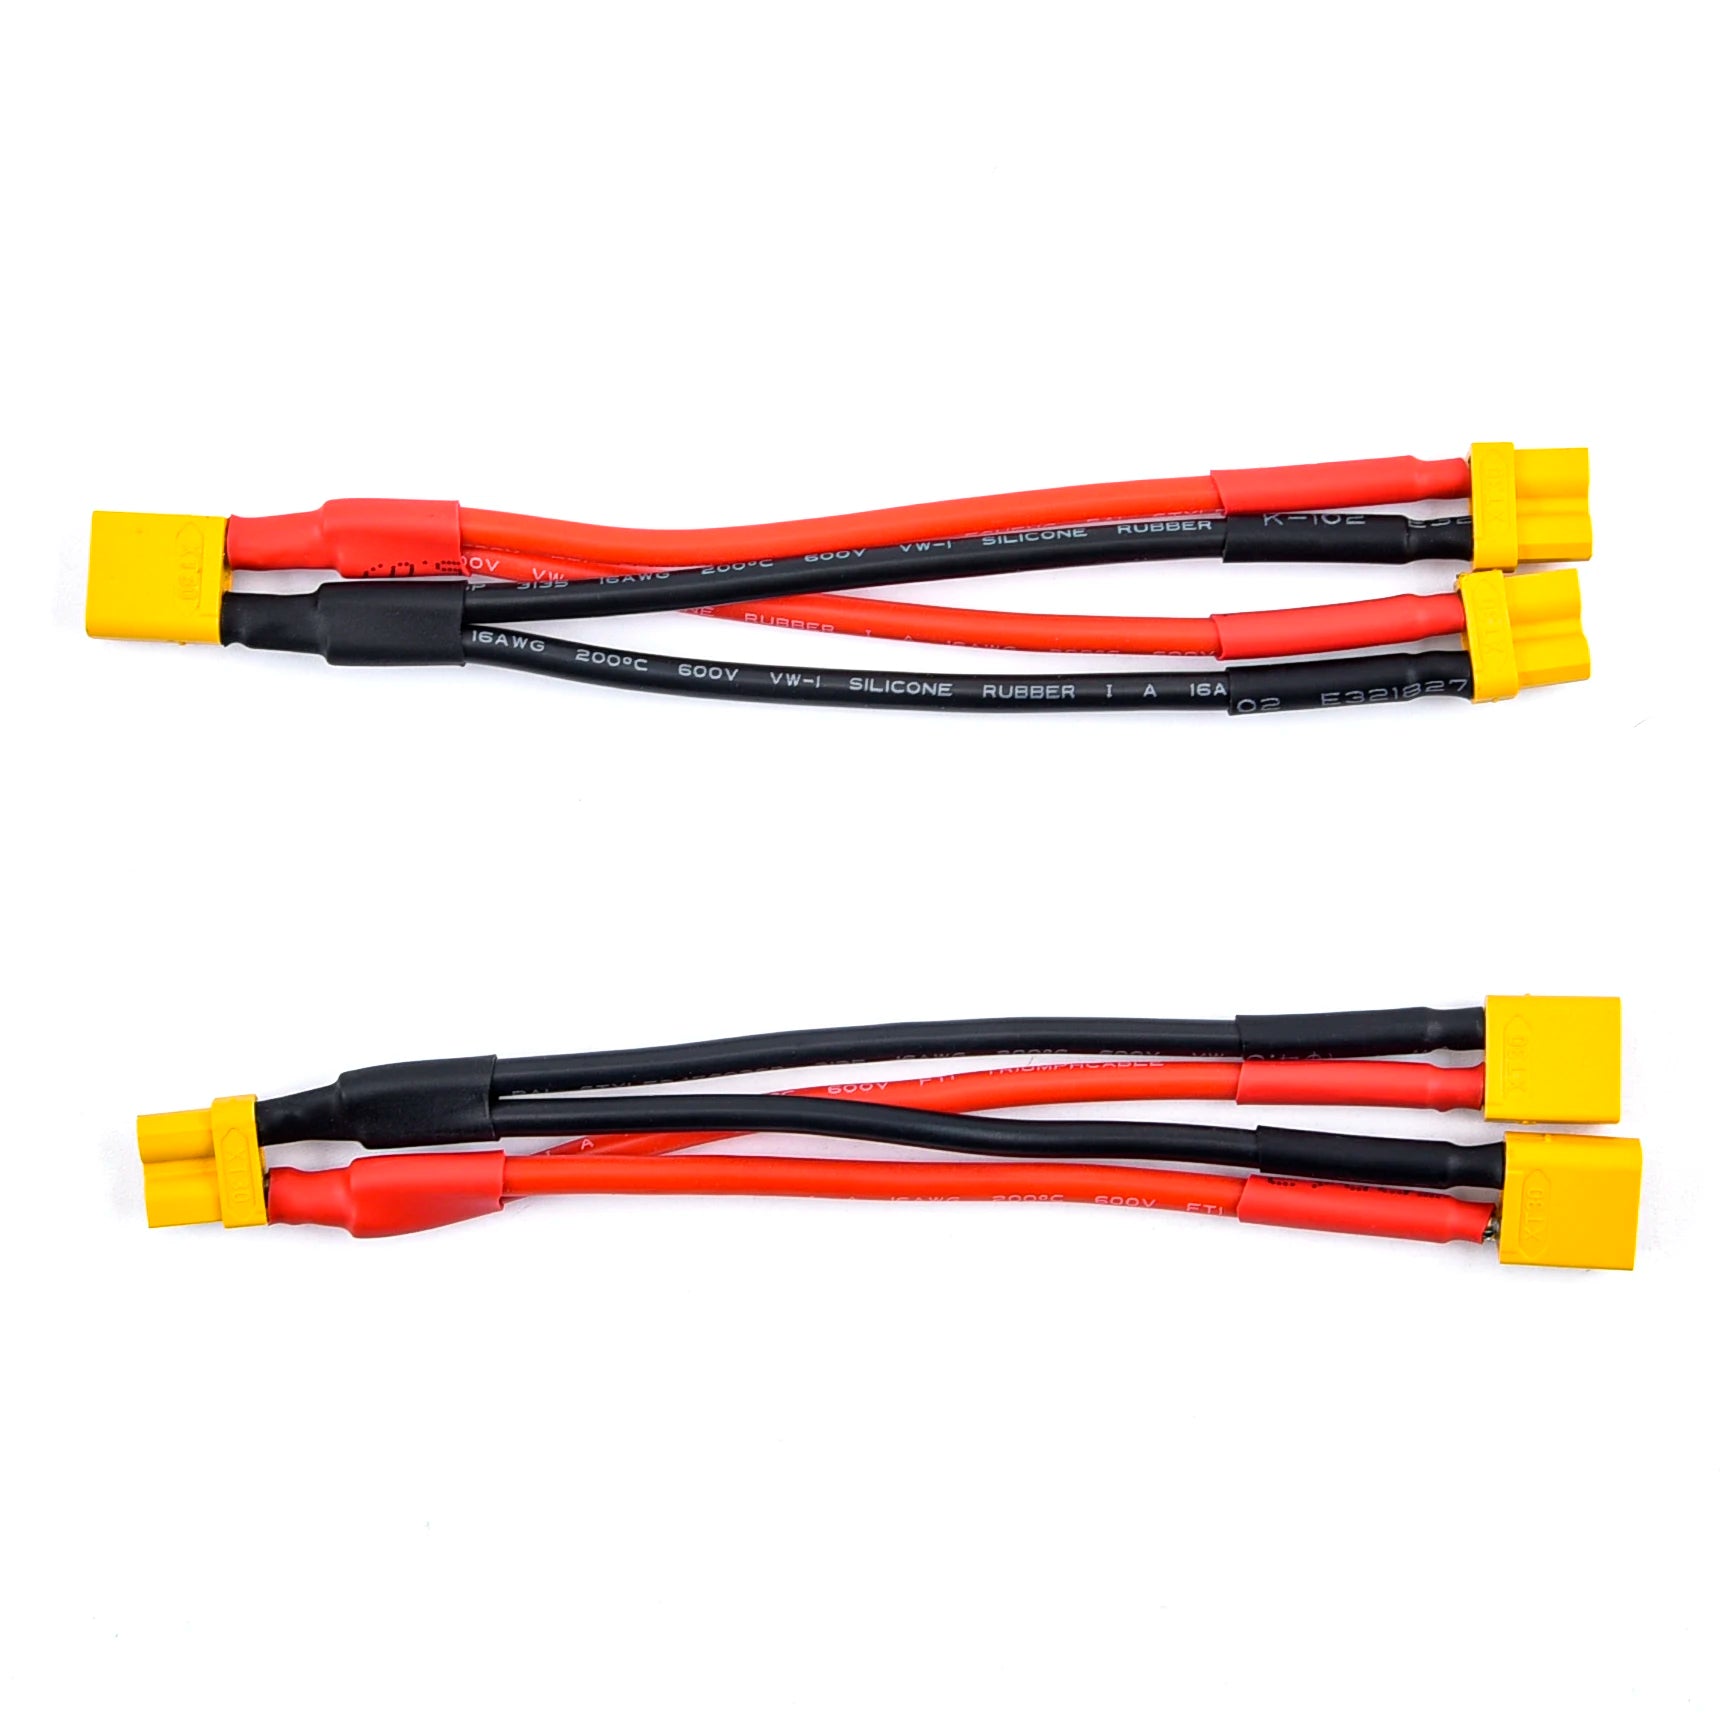 FPV Drone Battery Charger Cable, SICICSTTE FOBBER SILICONE RUBBER J6A 2 99